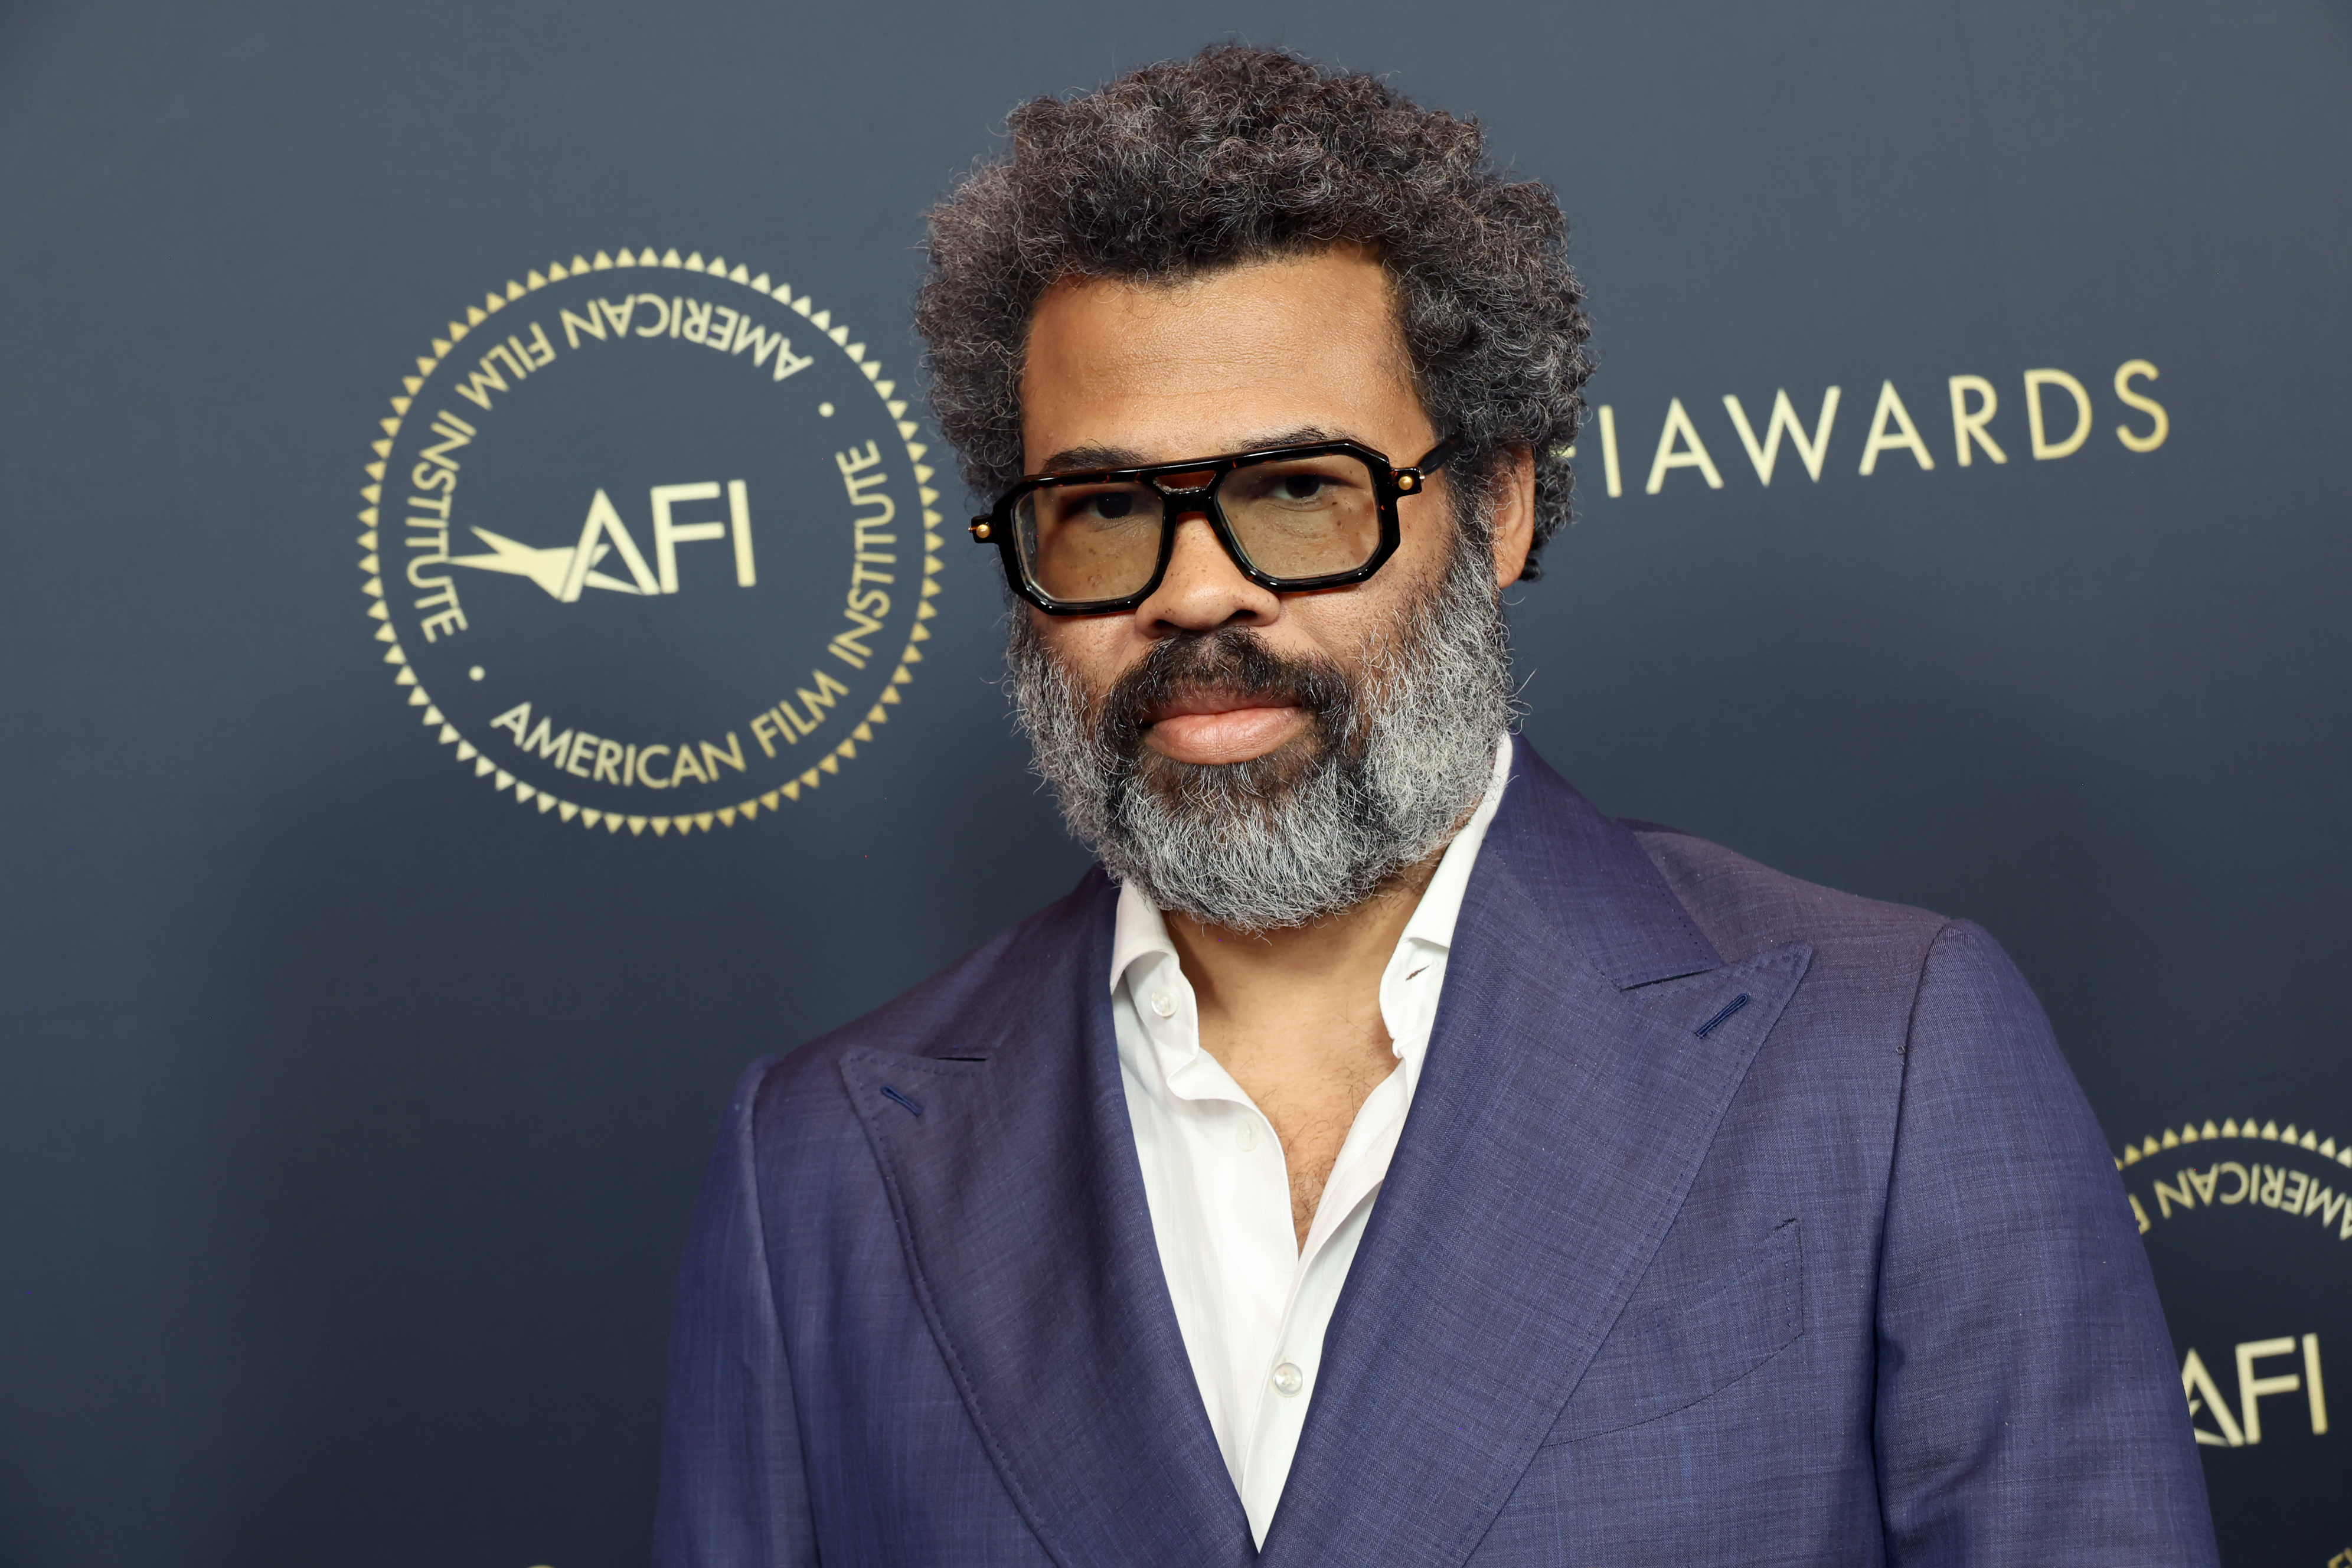 Man in a blue suit and white shirt at the AFI Awards event